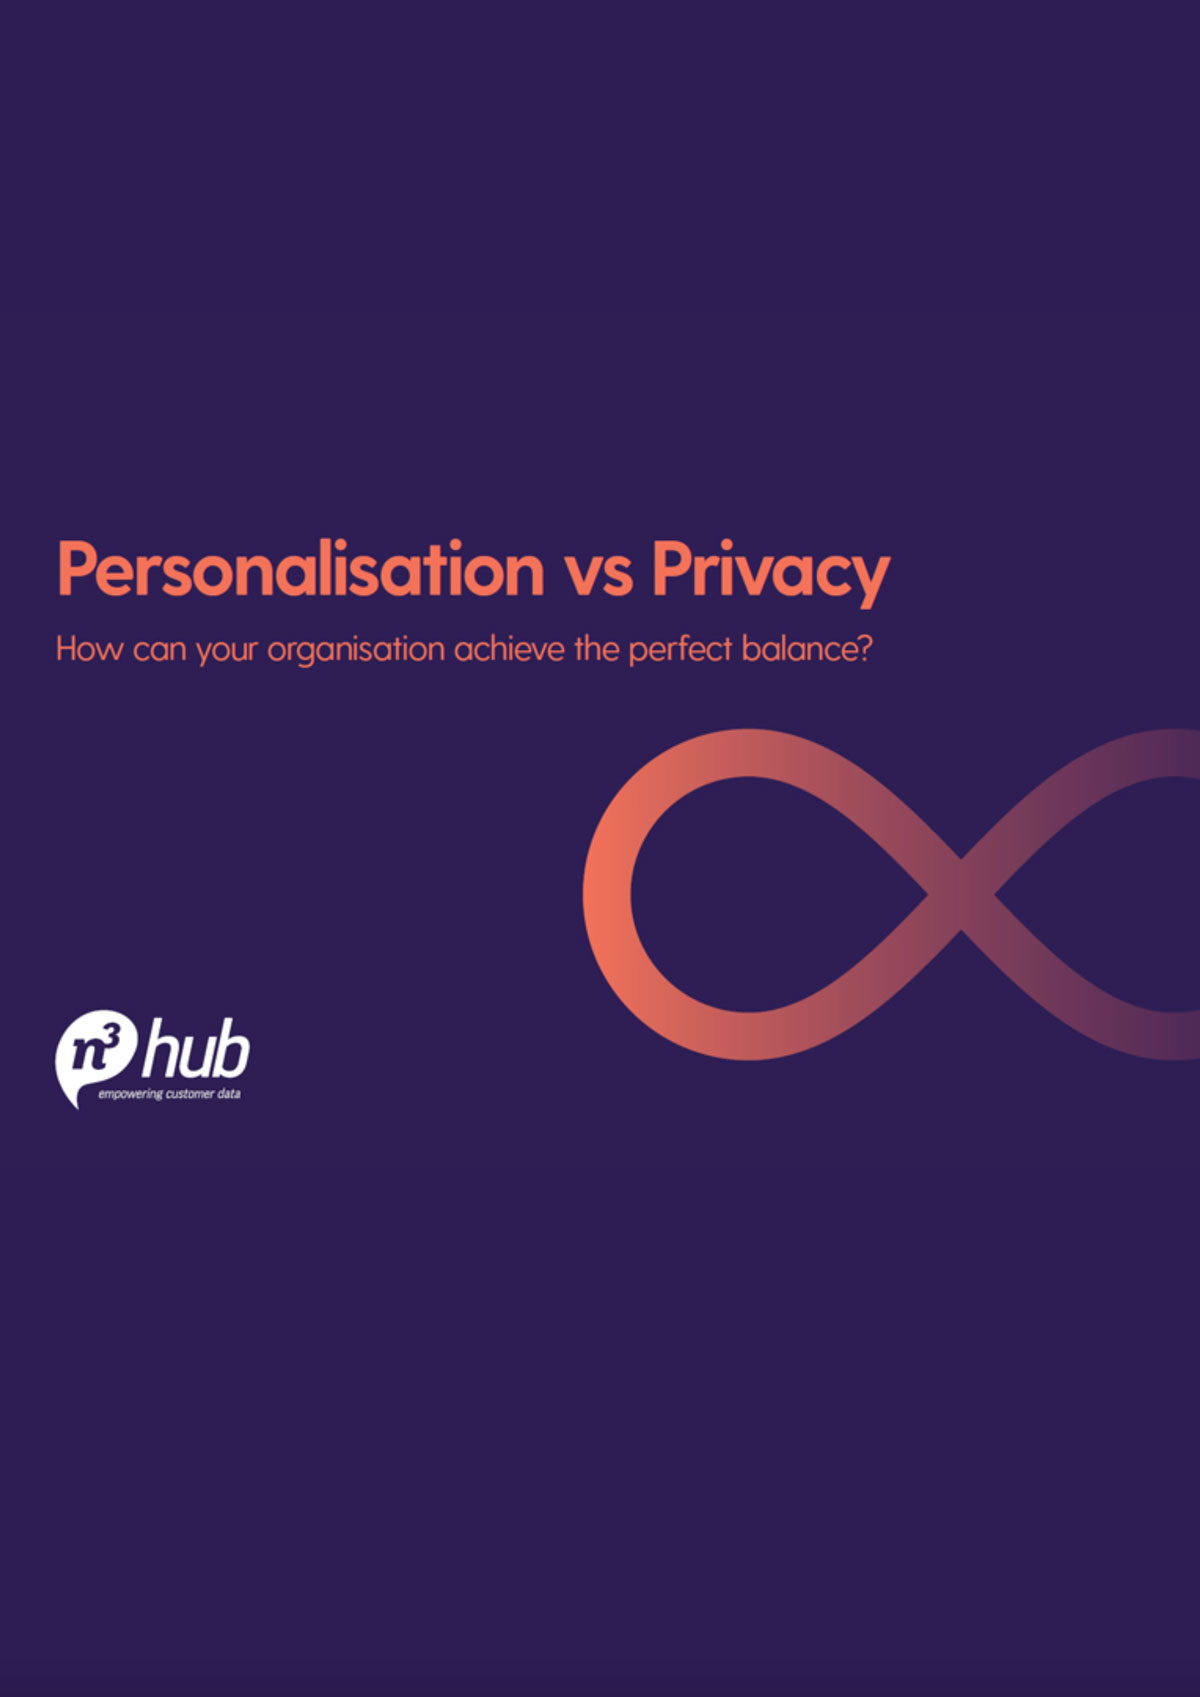 Personalisation vs Privacy – how can your organisation achieve the perfect balance?